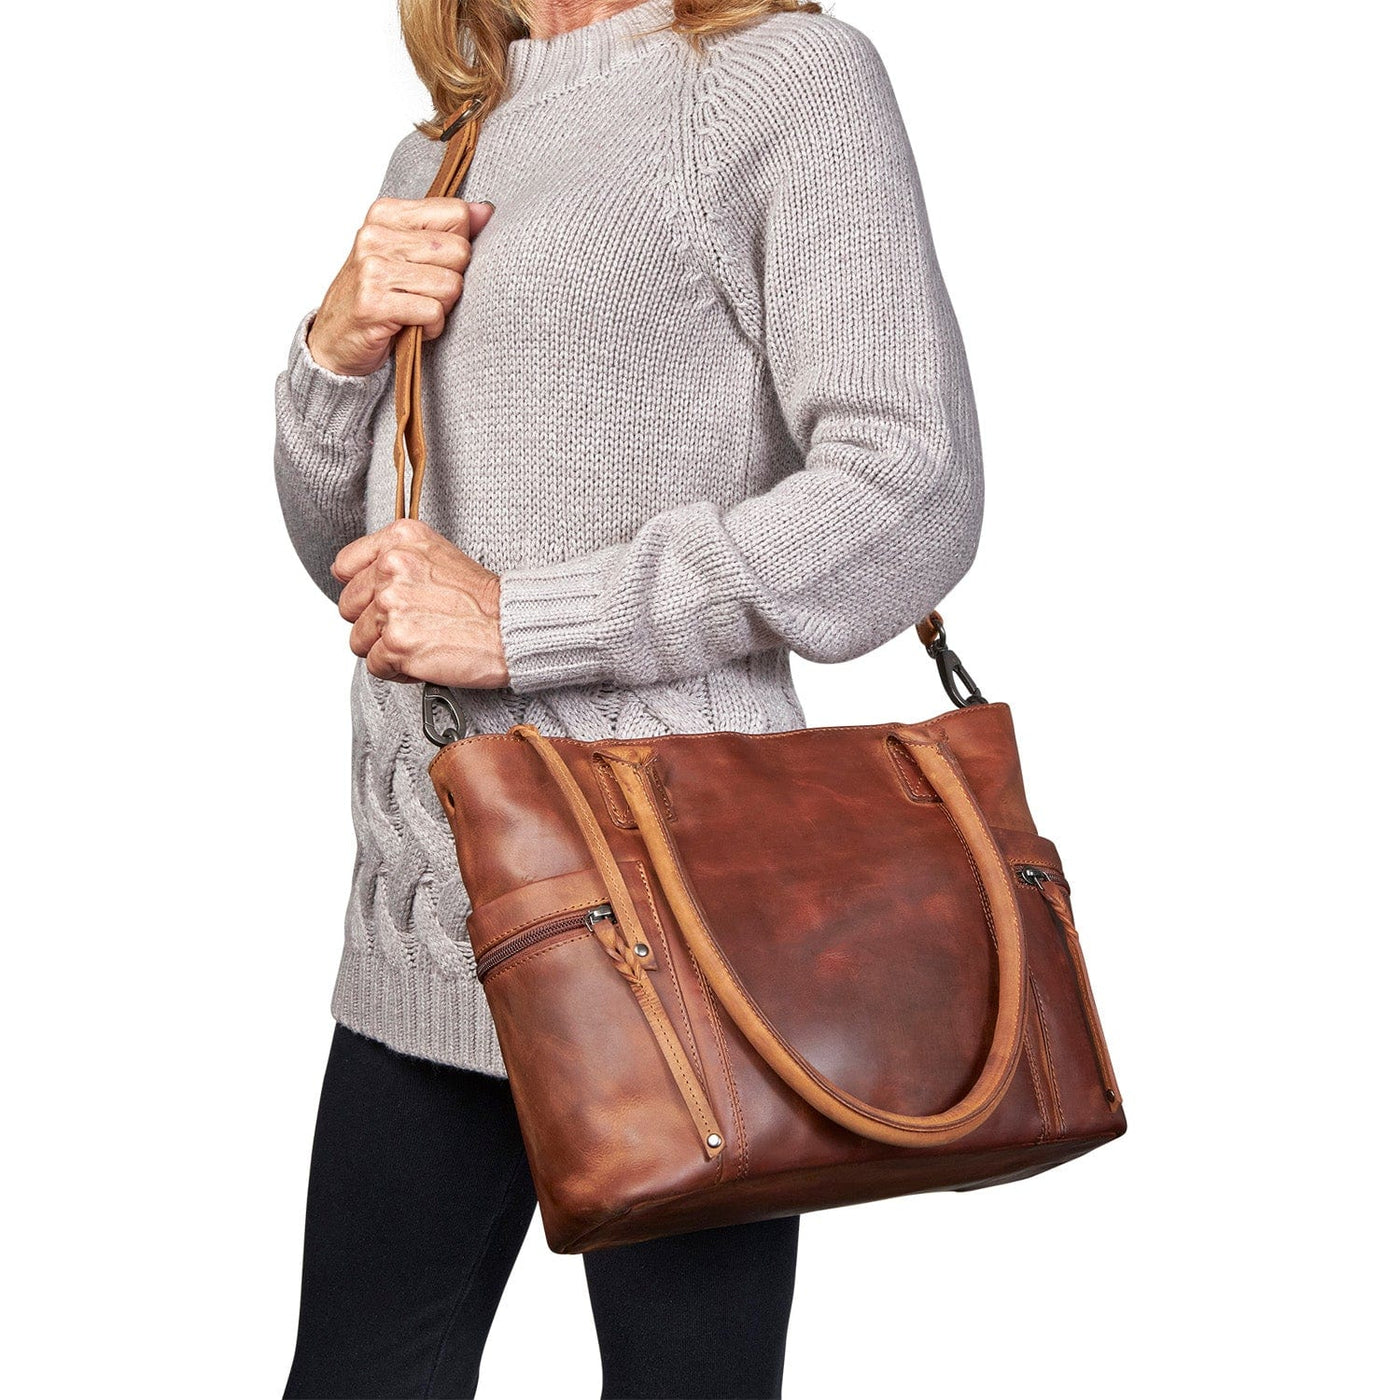 Concealed Carry Emerson Satchel